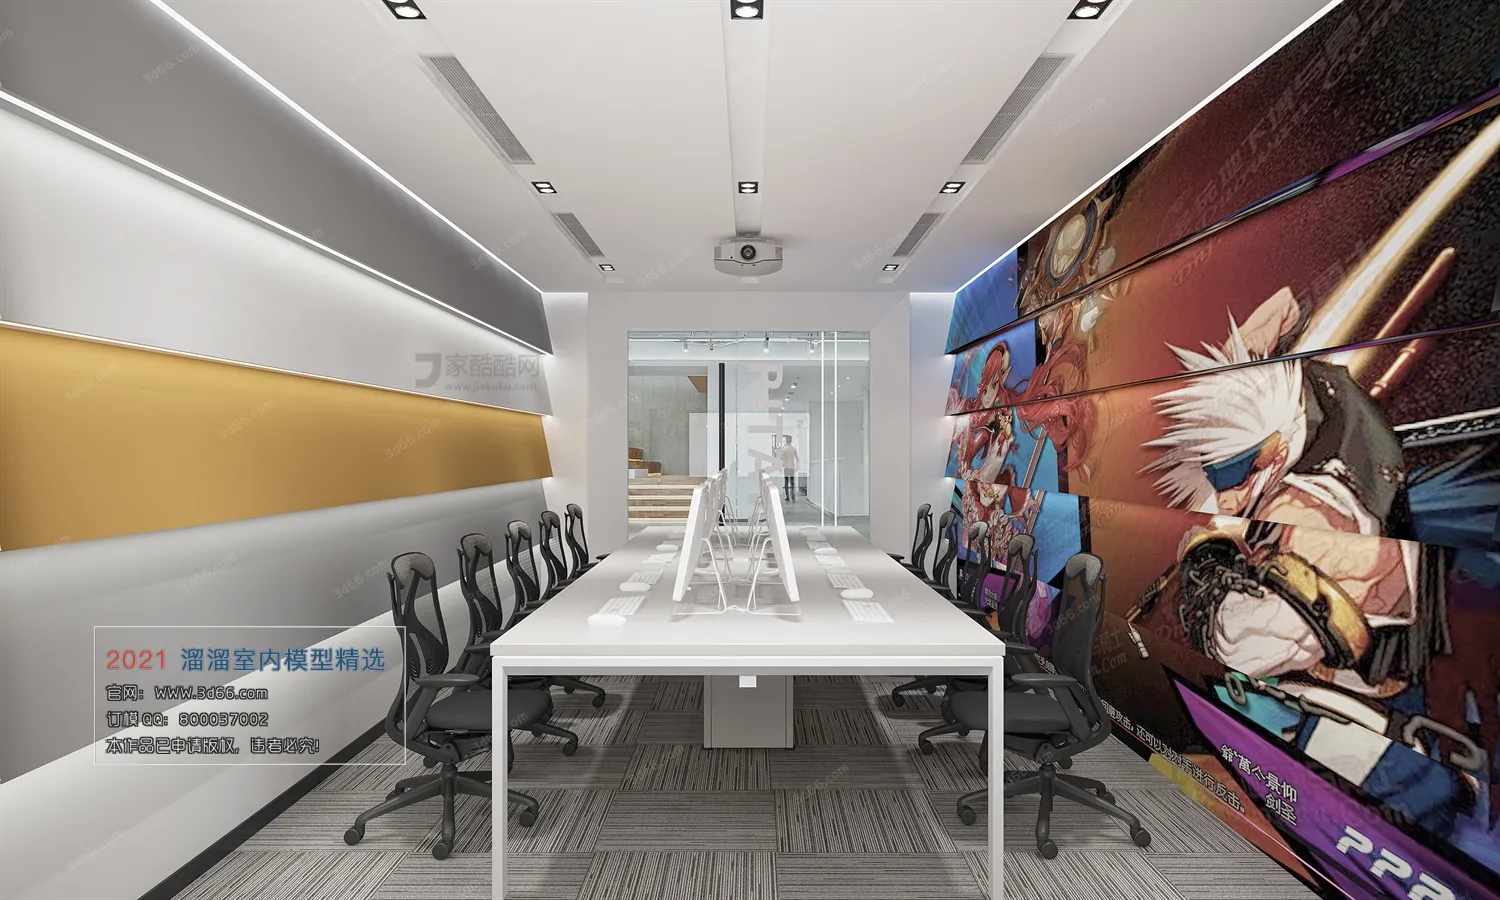 OFFICE, MEETING – A010-Modern style-Vray model